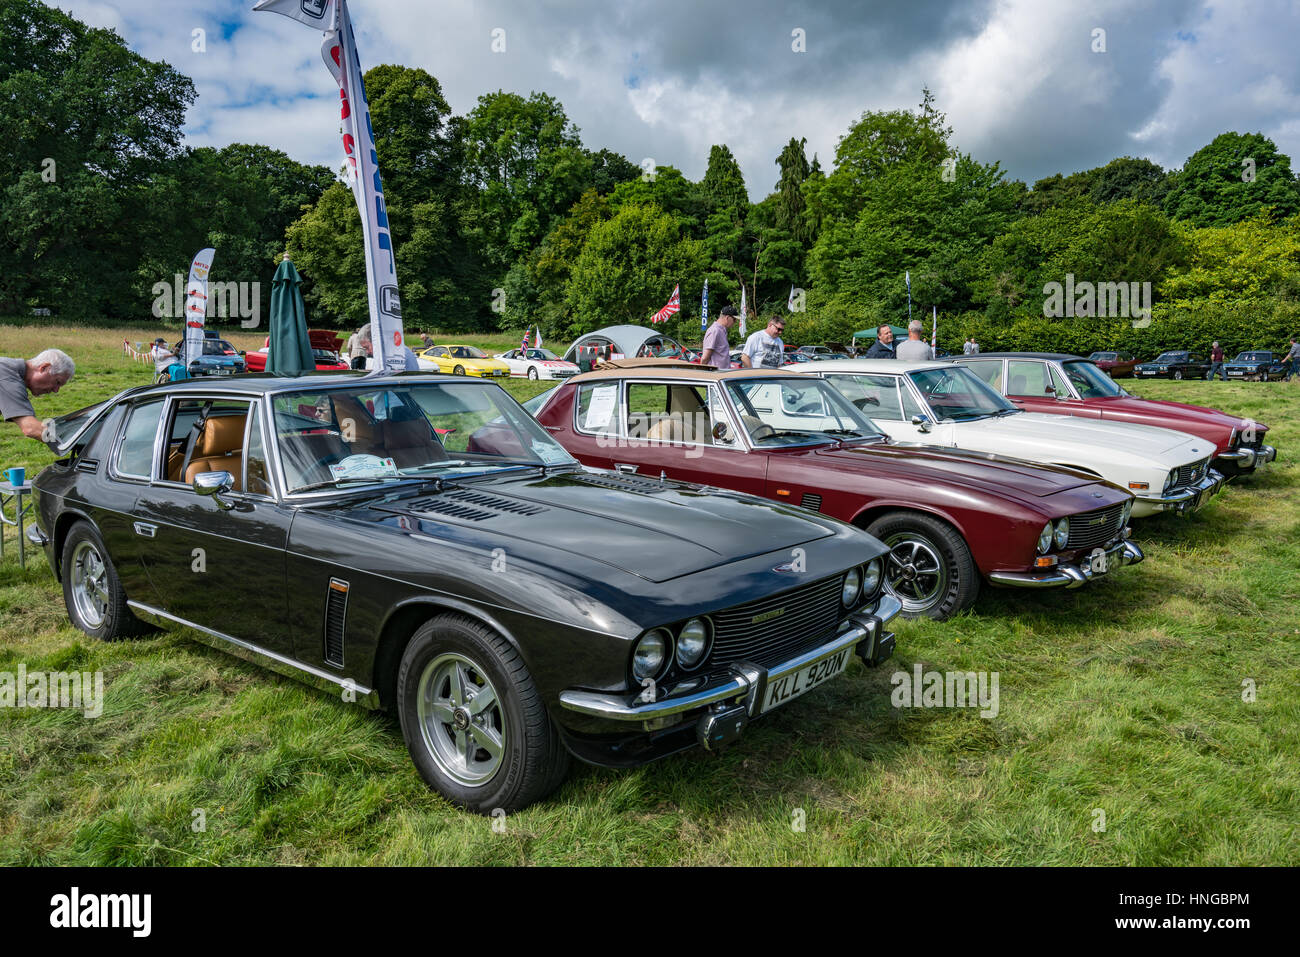 Three Interceptors and a Rover P6 on the Jensen Owners Club stand at the Bodelwyddan Classic Car Show Stock Photo